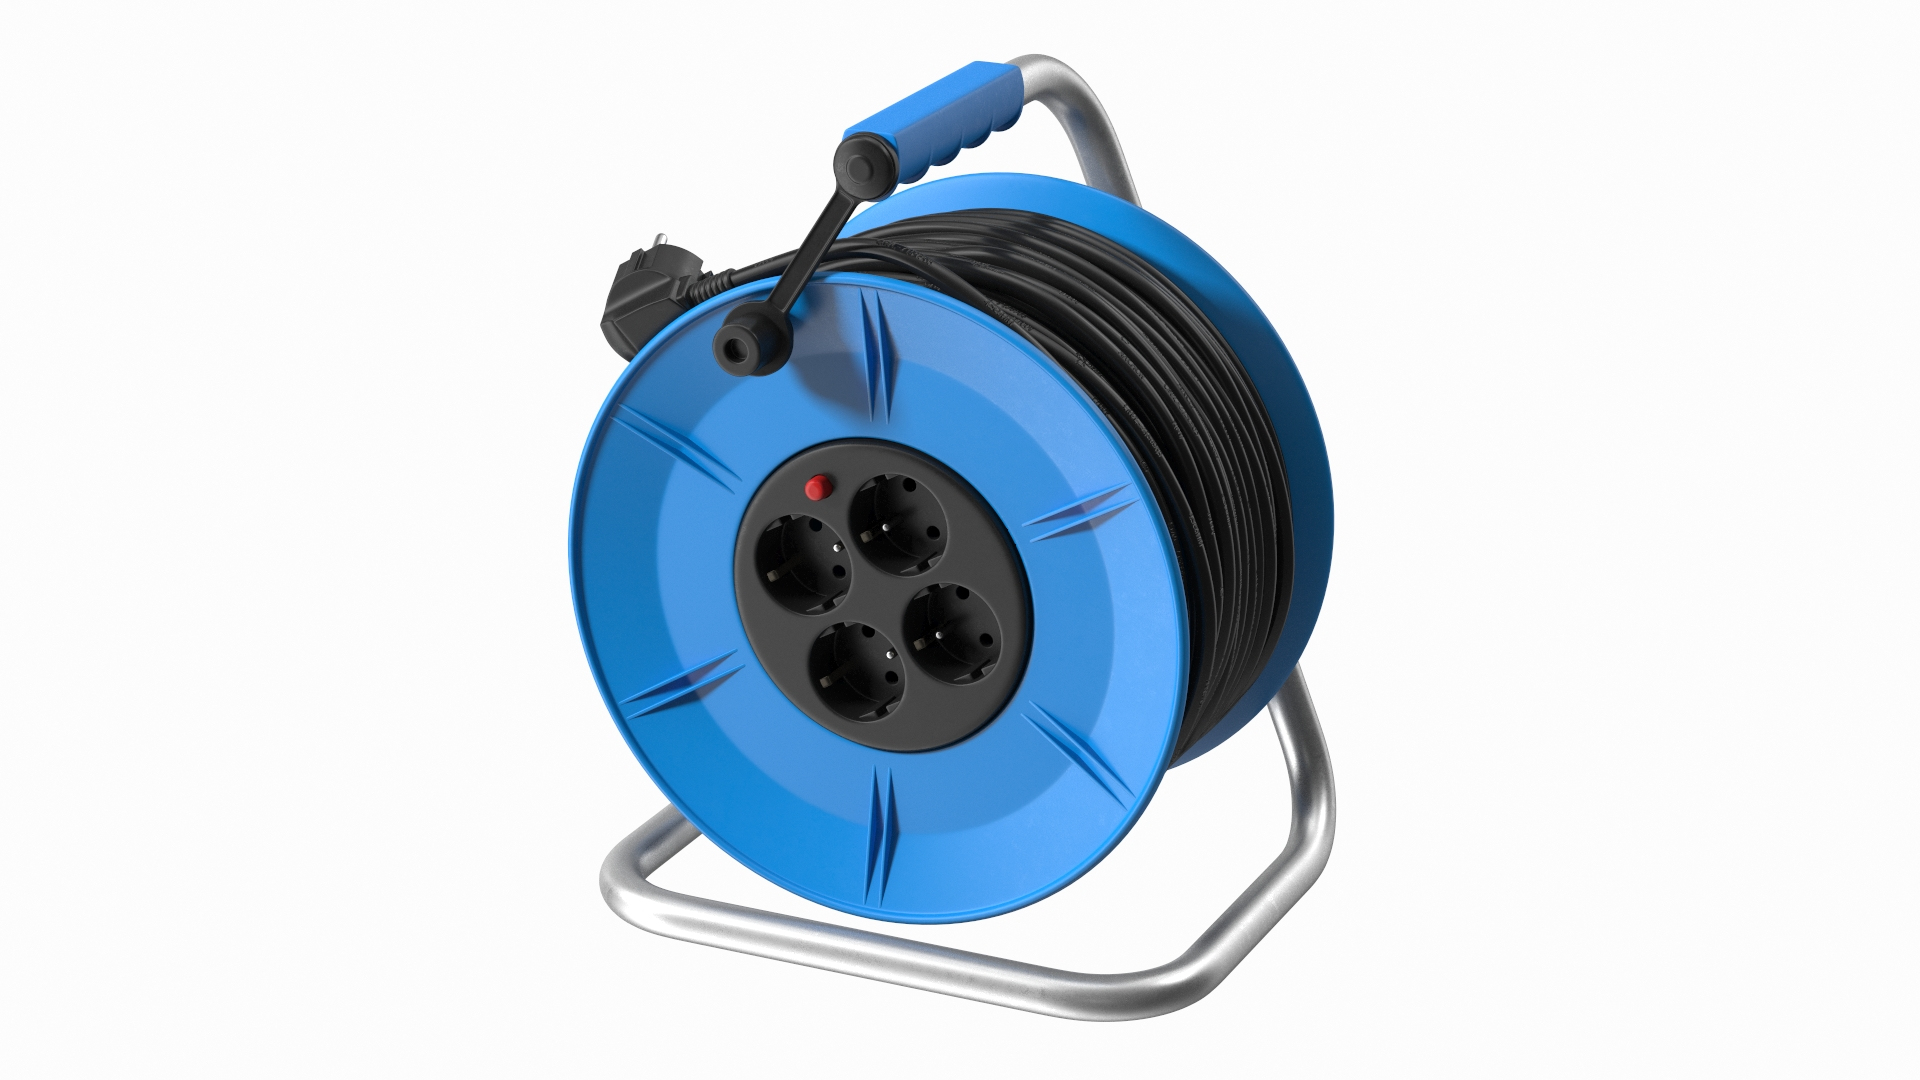 https://p.turbosquid.com/ts-thumb/1a/5GLtKo/UE/extension_cord_reel_with_4_electrical_power_outlets_360/jpg/1647872330/1920x1080/turn_fit_q99/2be232b65b0fd82277439660d8ee721487eeb221/extension_cord_reel_with_4_electrical_power_outlets_360-1.jpg